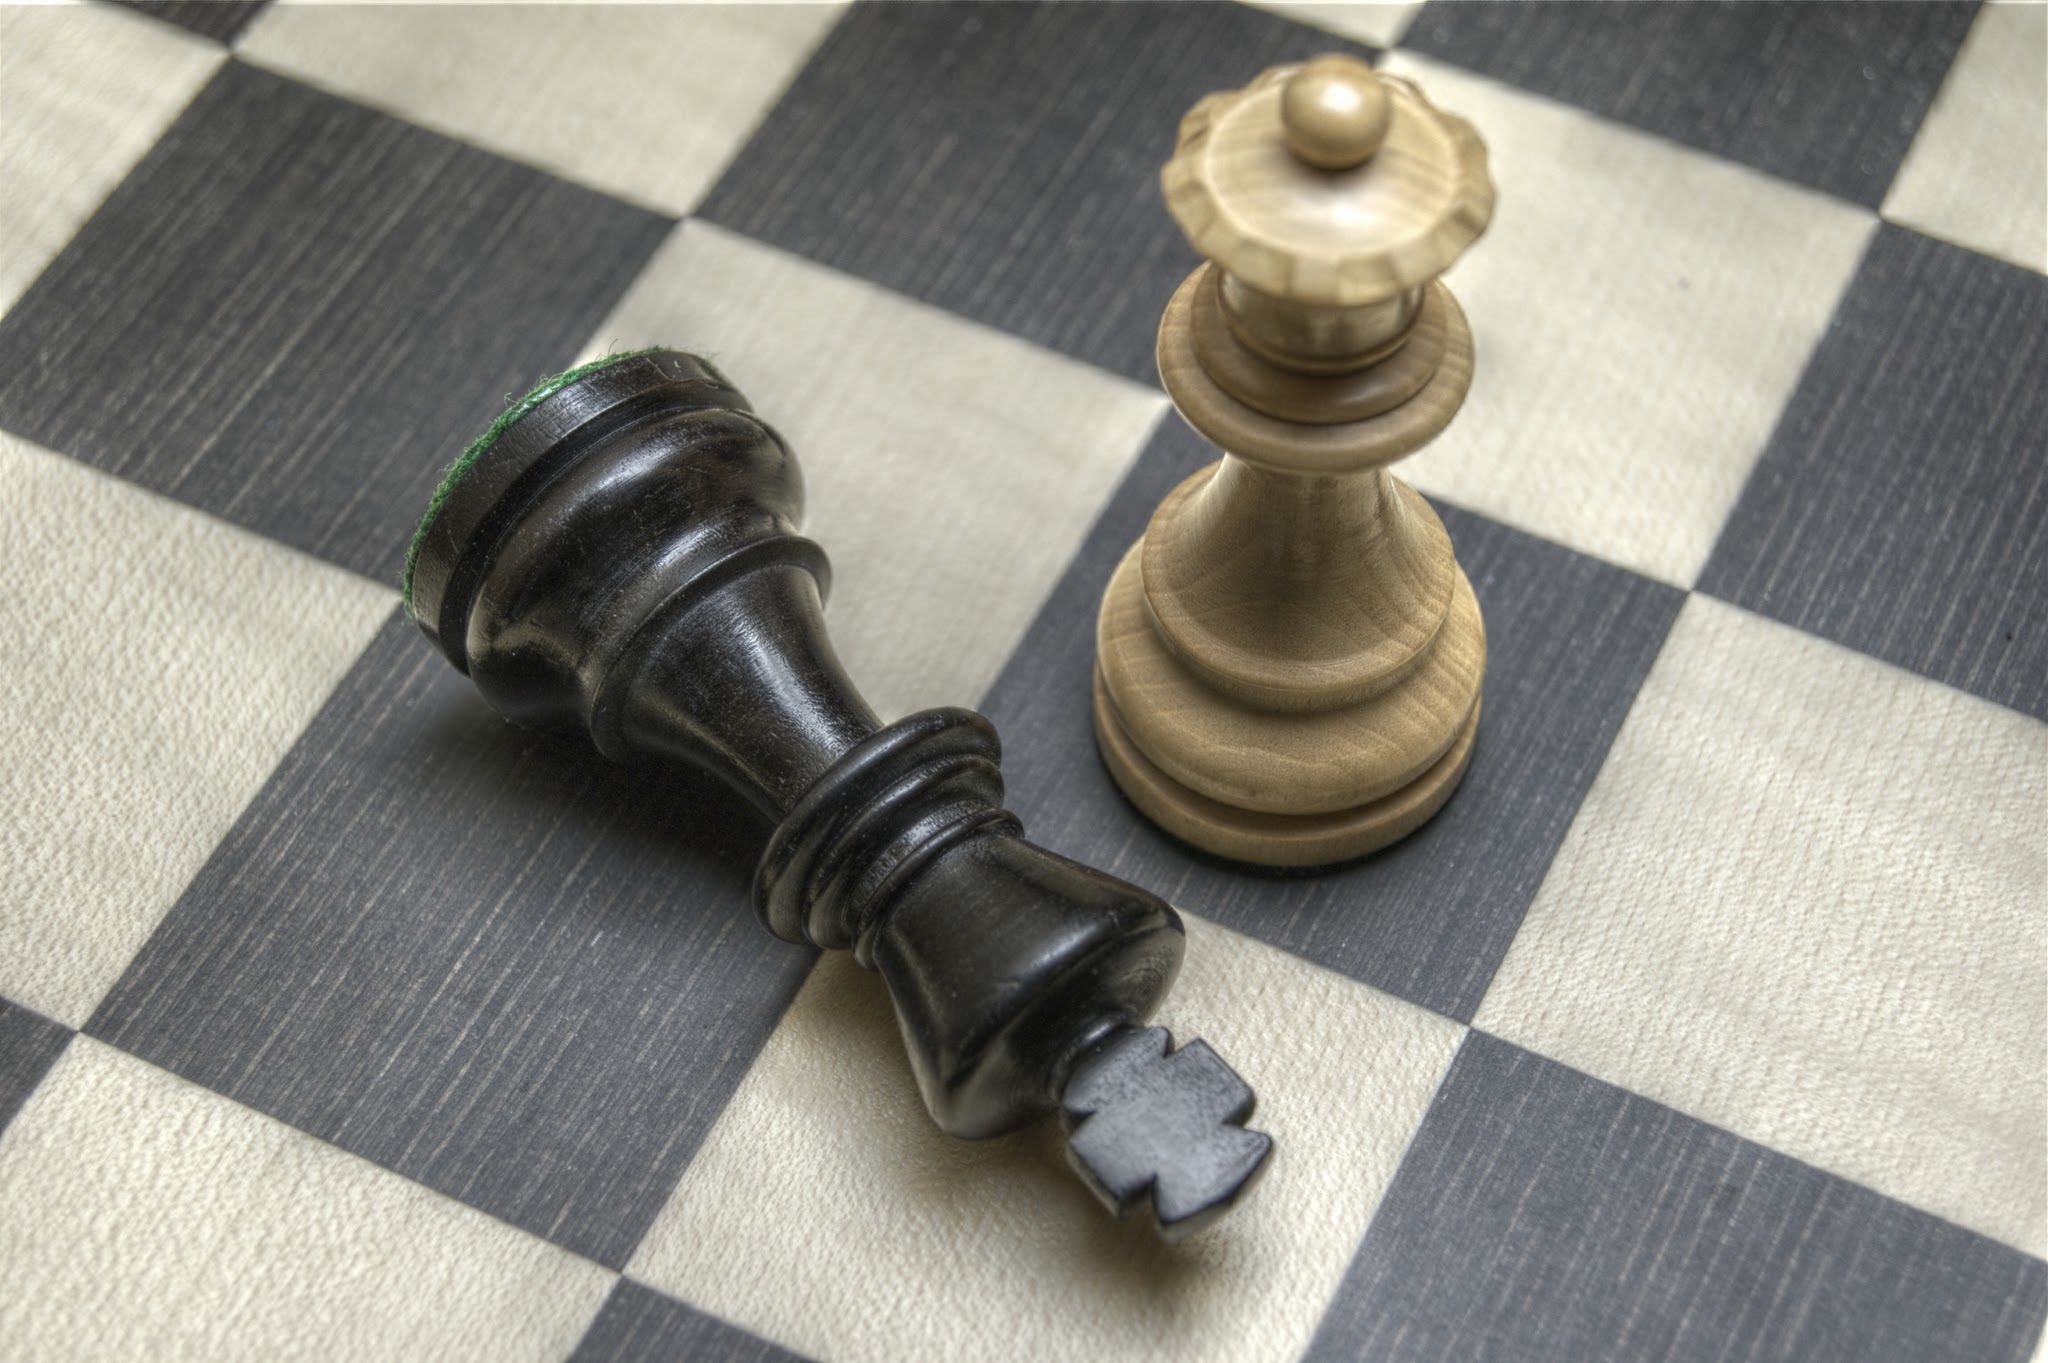 checkmate in chess